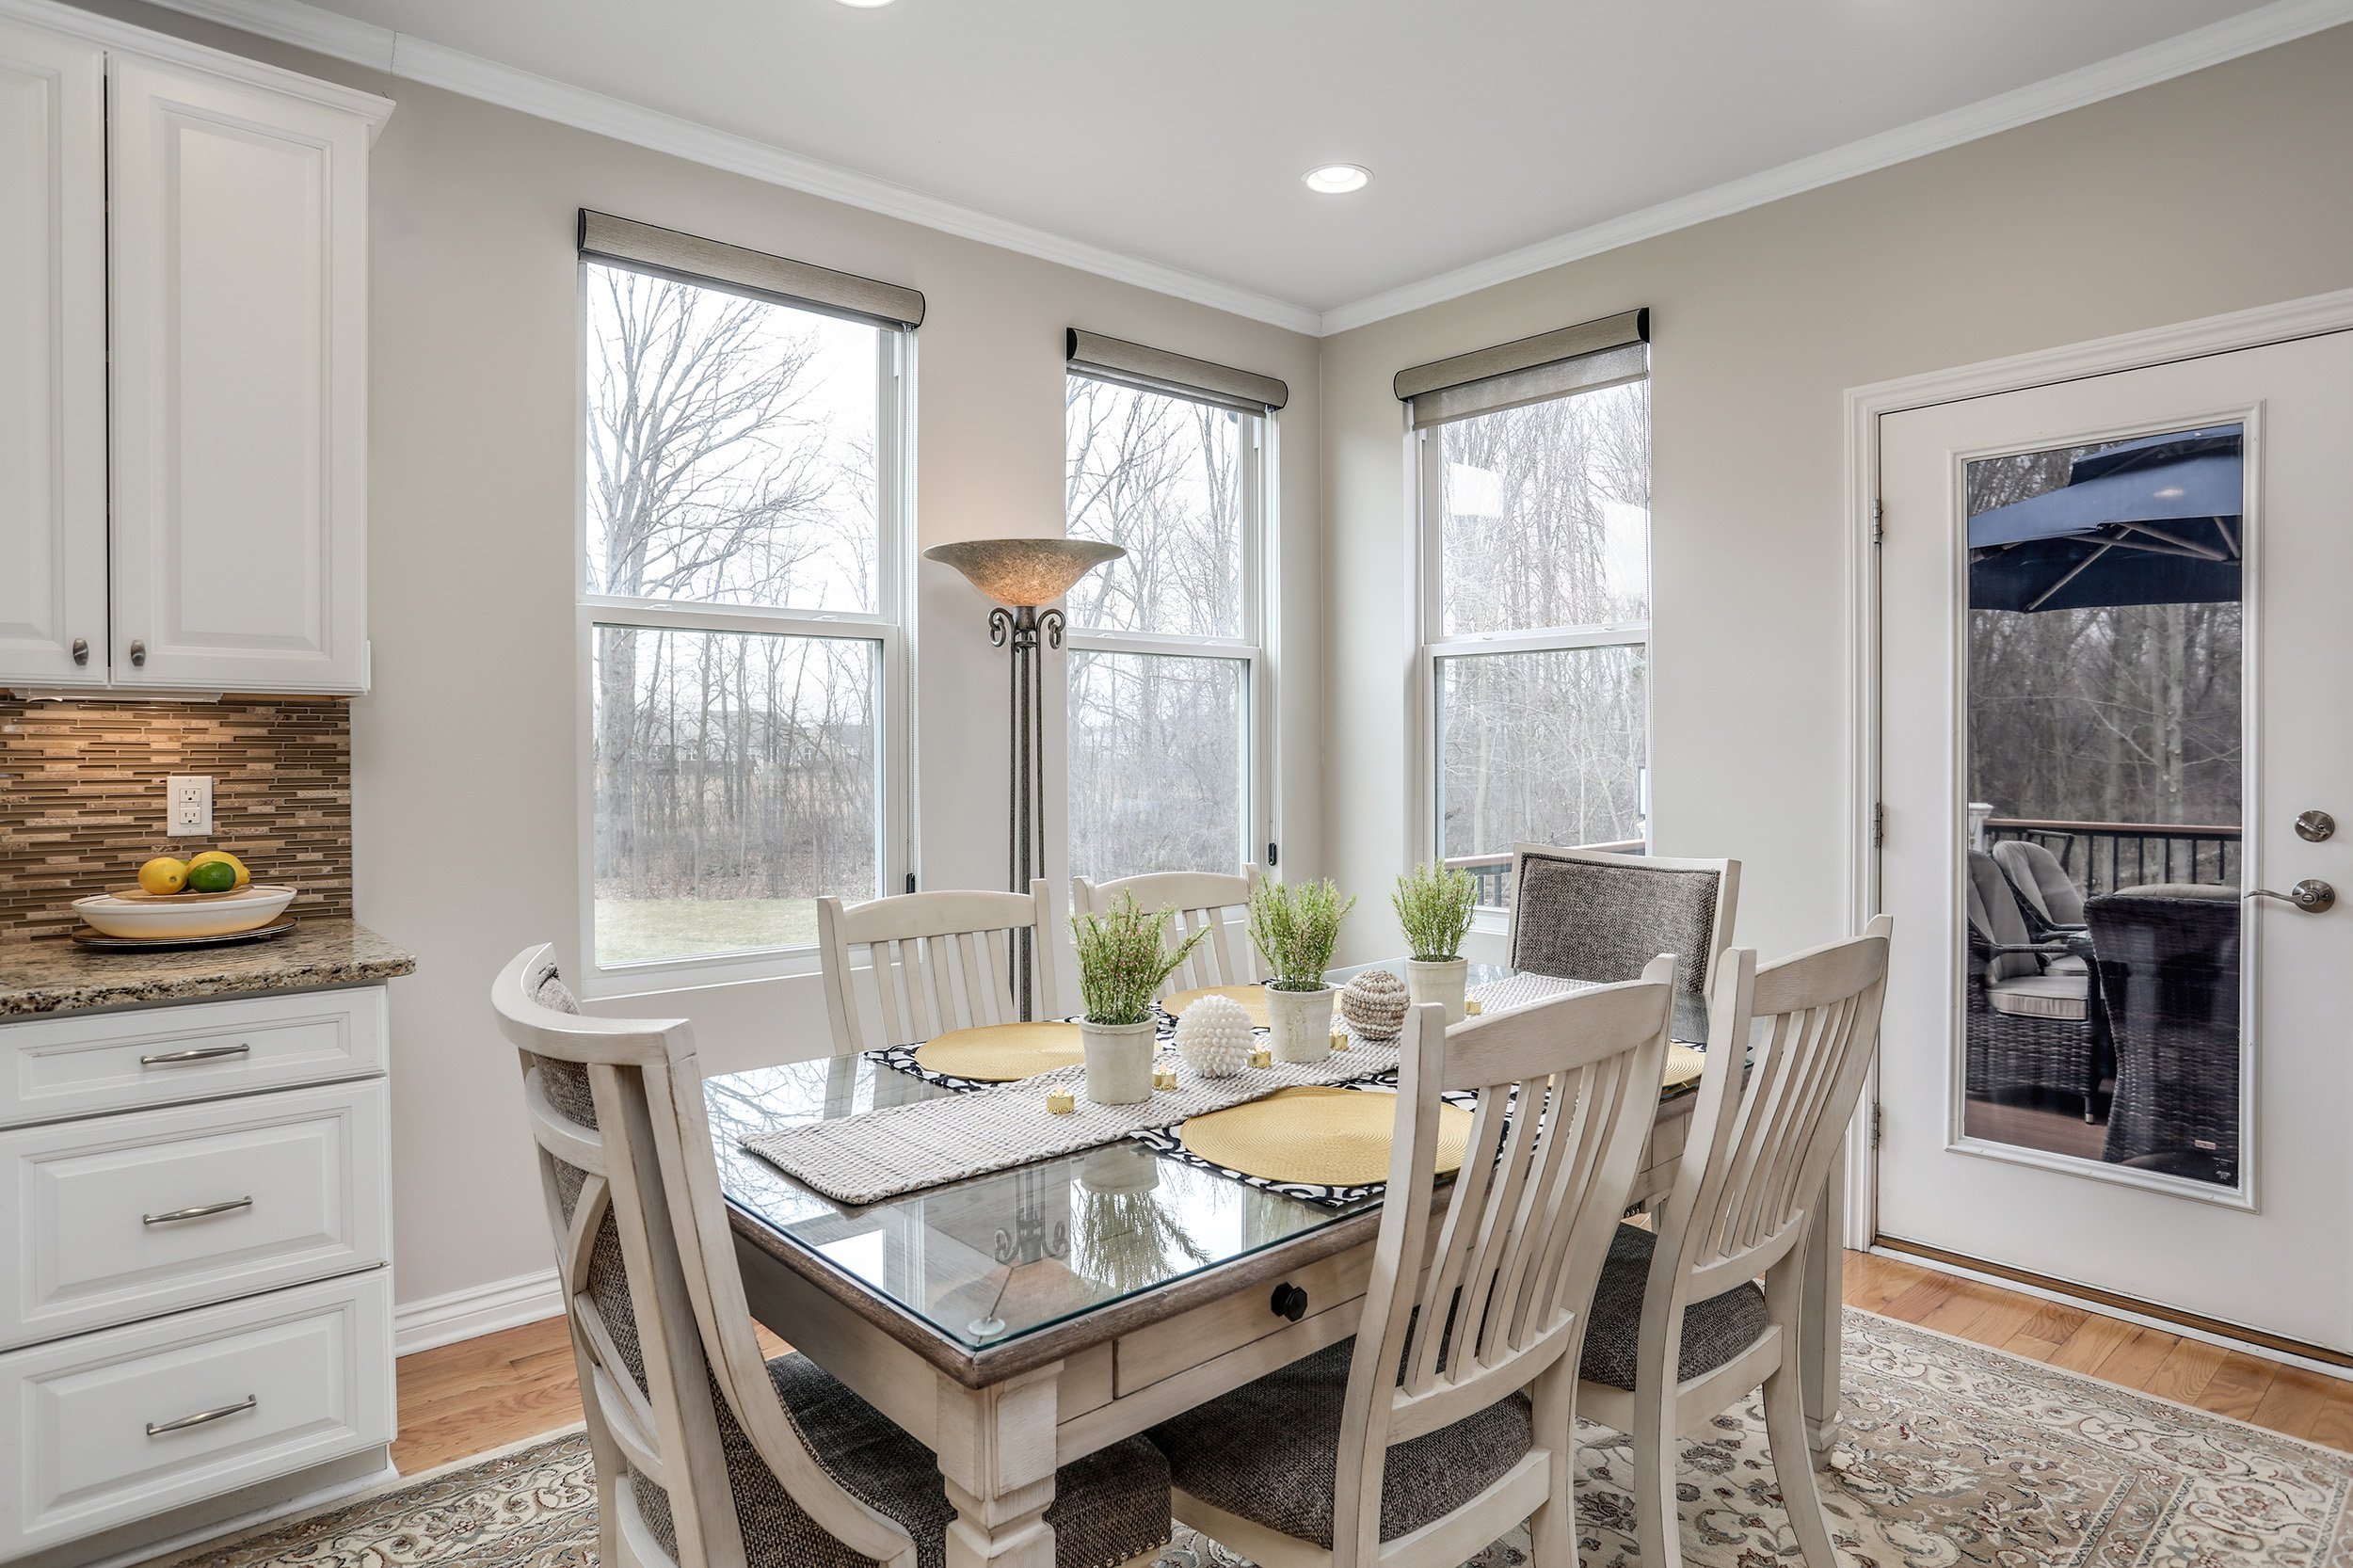  Canton Real Estate Photography - dining area 